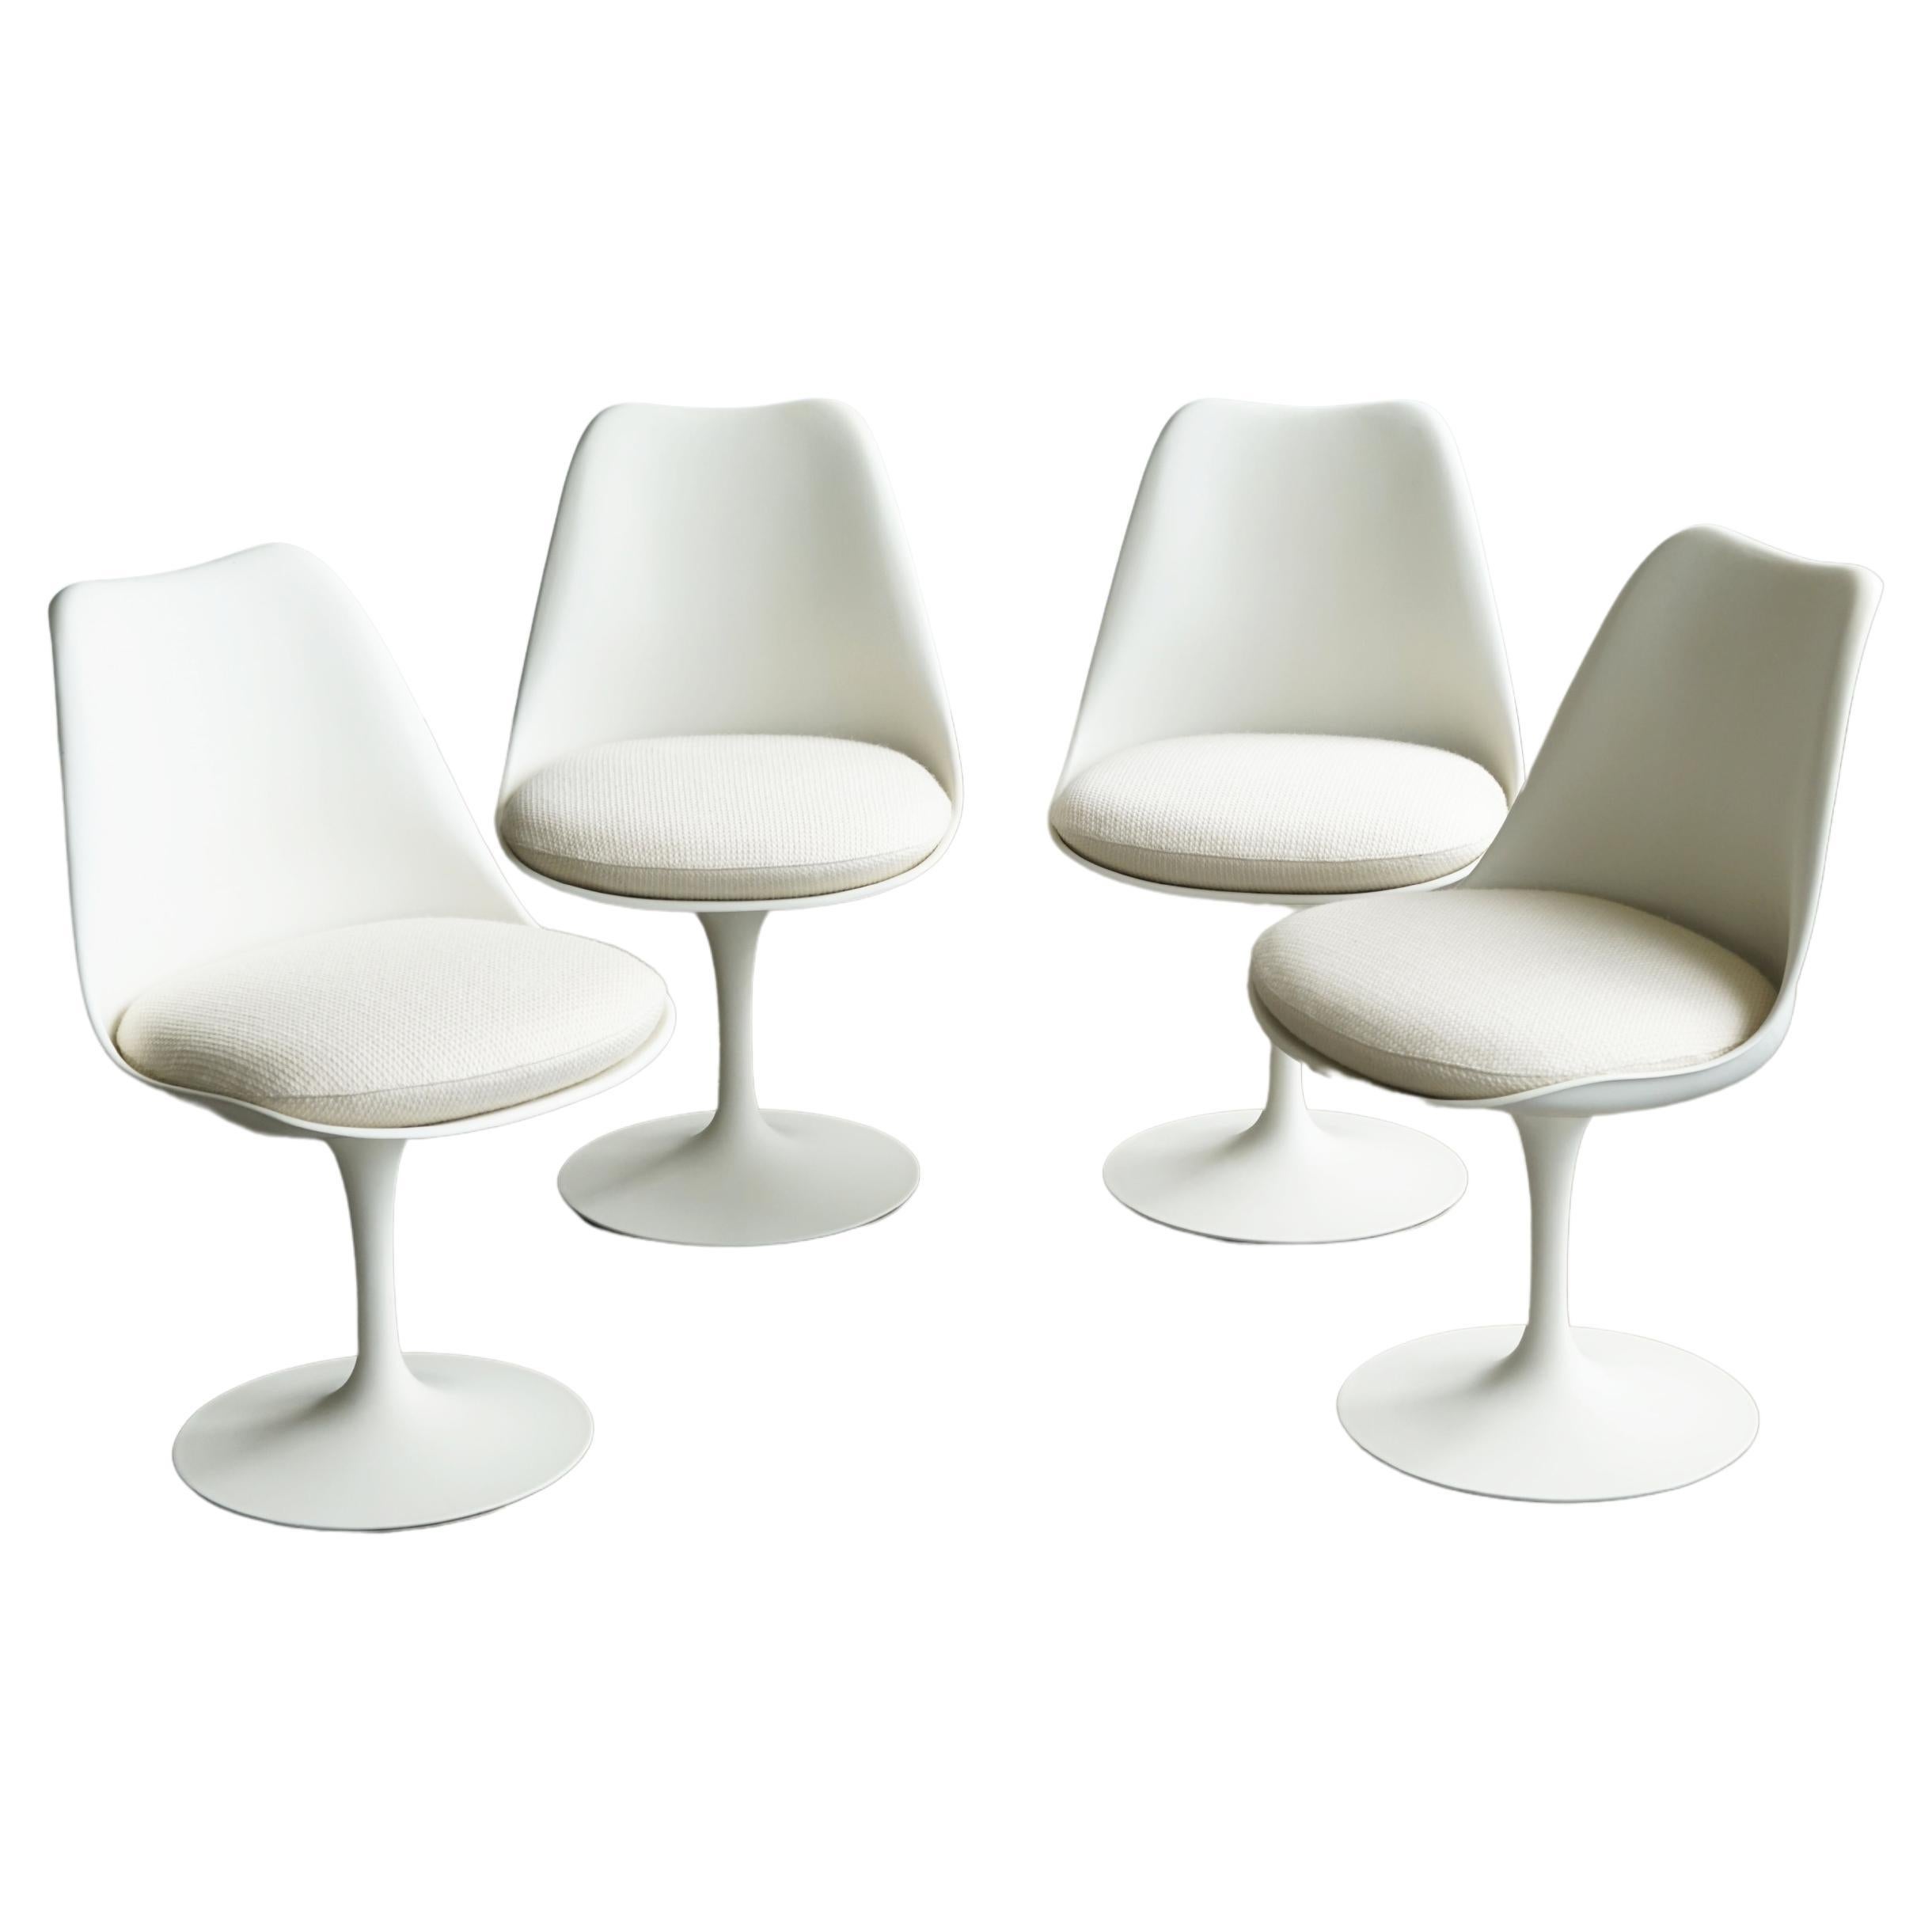 1960's Eero Saarinen Tulip dining chairs for Knoll, set of 4 upholstered